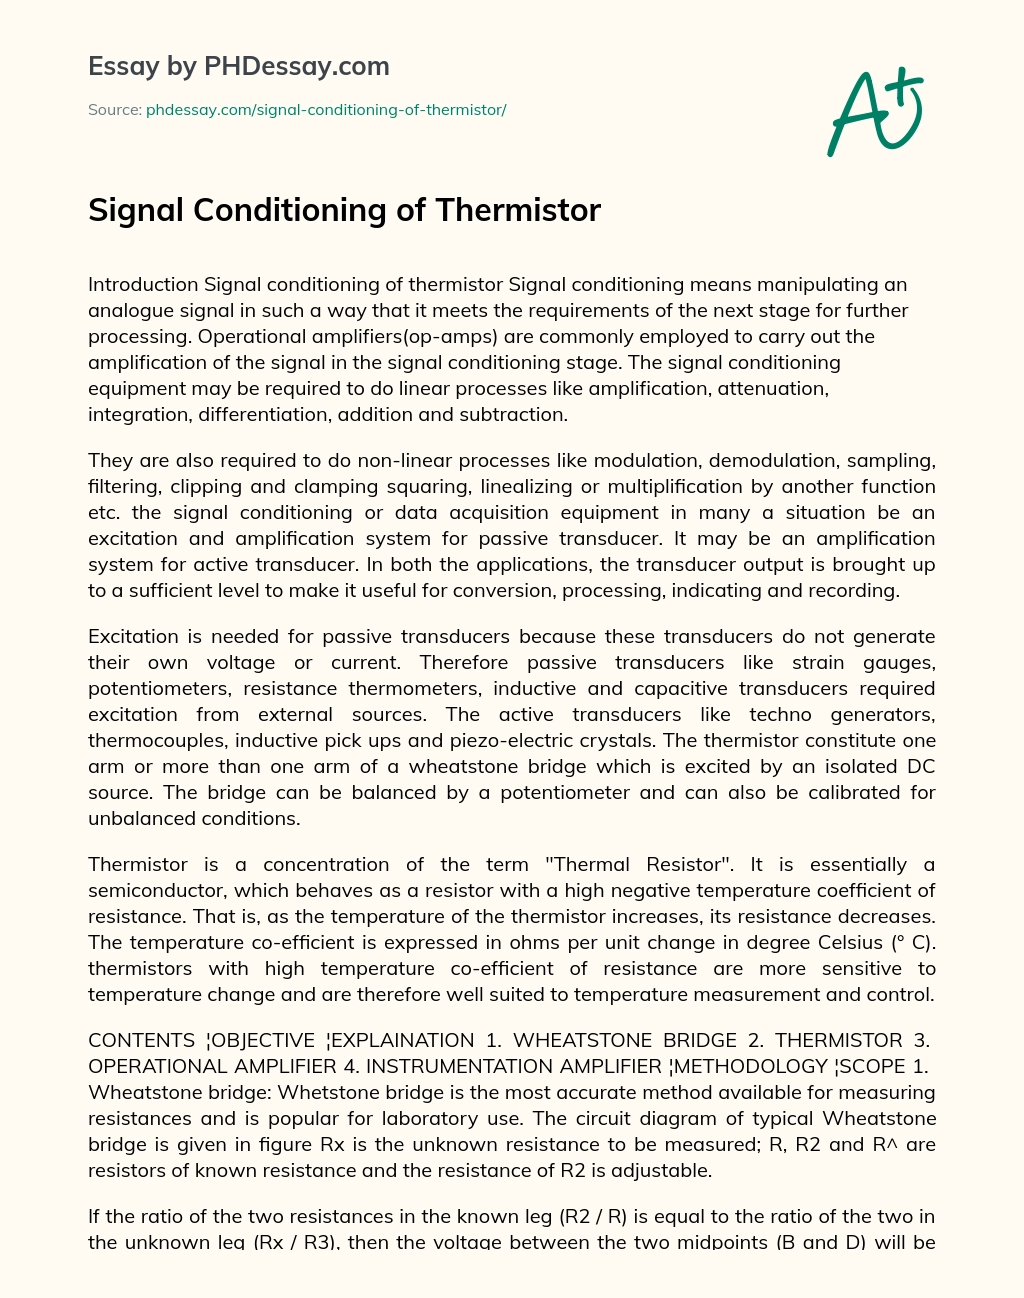 Signal Conditioning of Thermistor essay